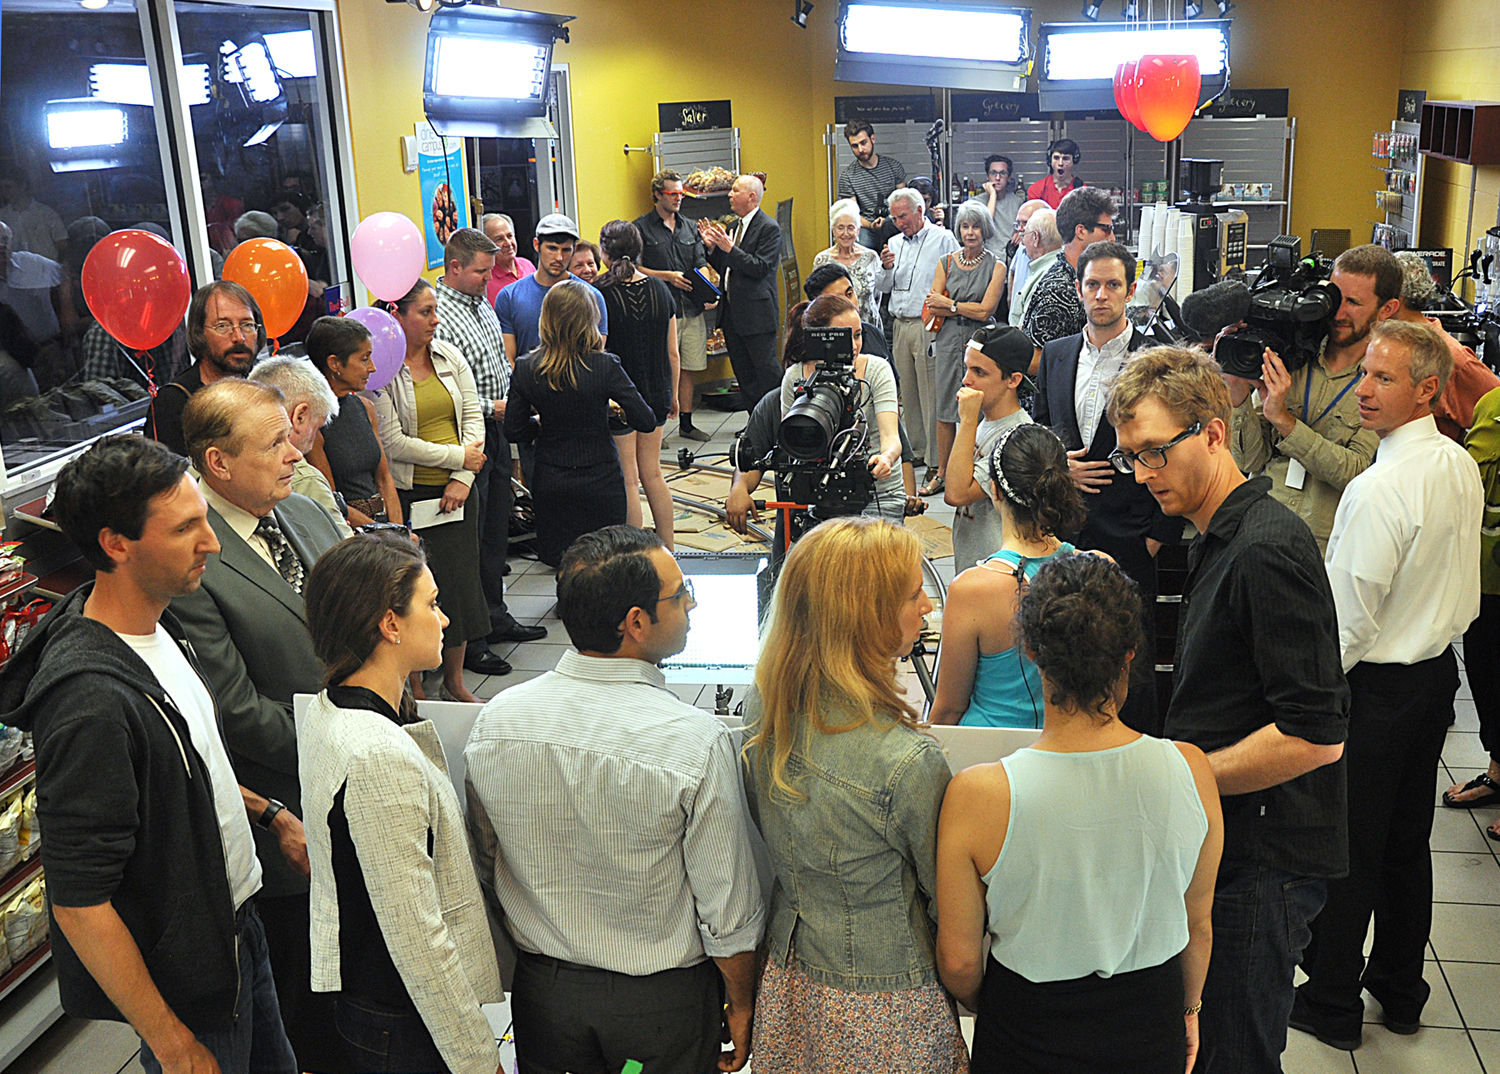 On the set of 'The Lucky 6' during the lottery check award scene, featuring many Sarasota media. Photo: Rich Schineller